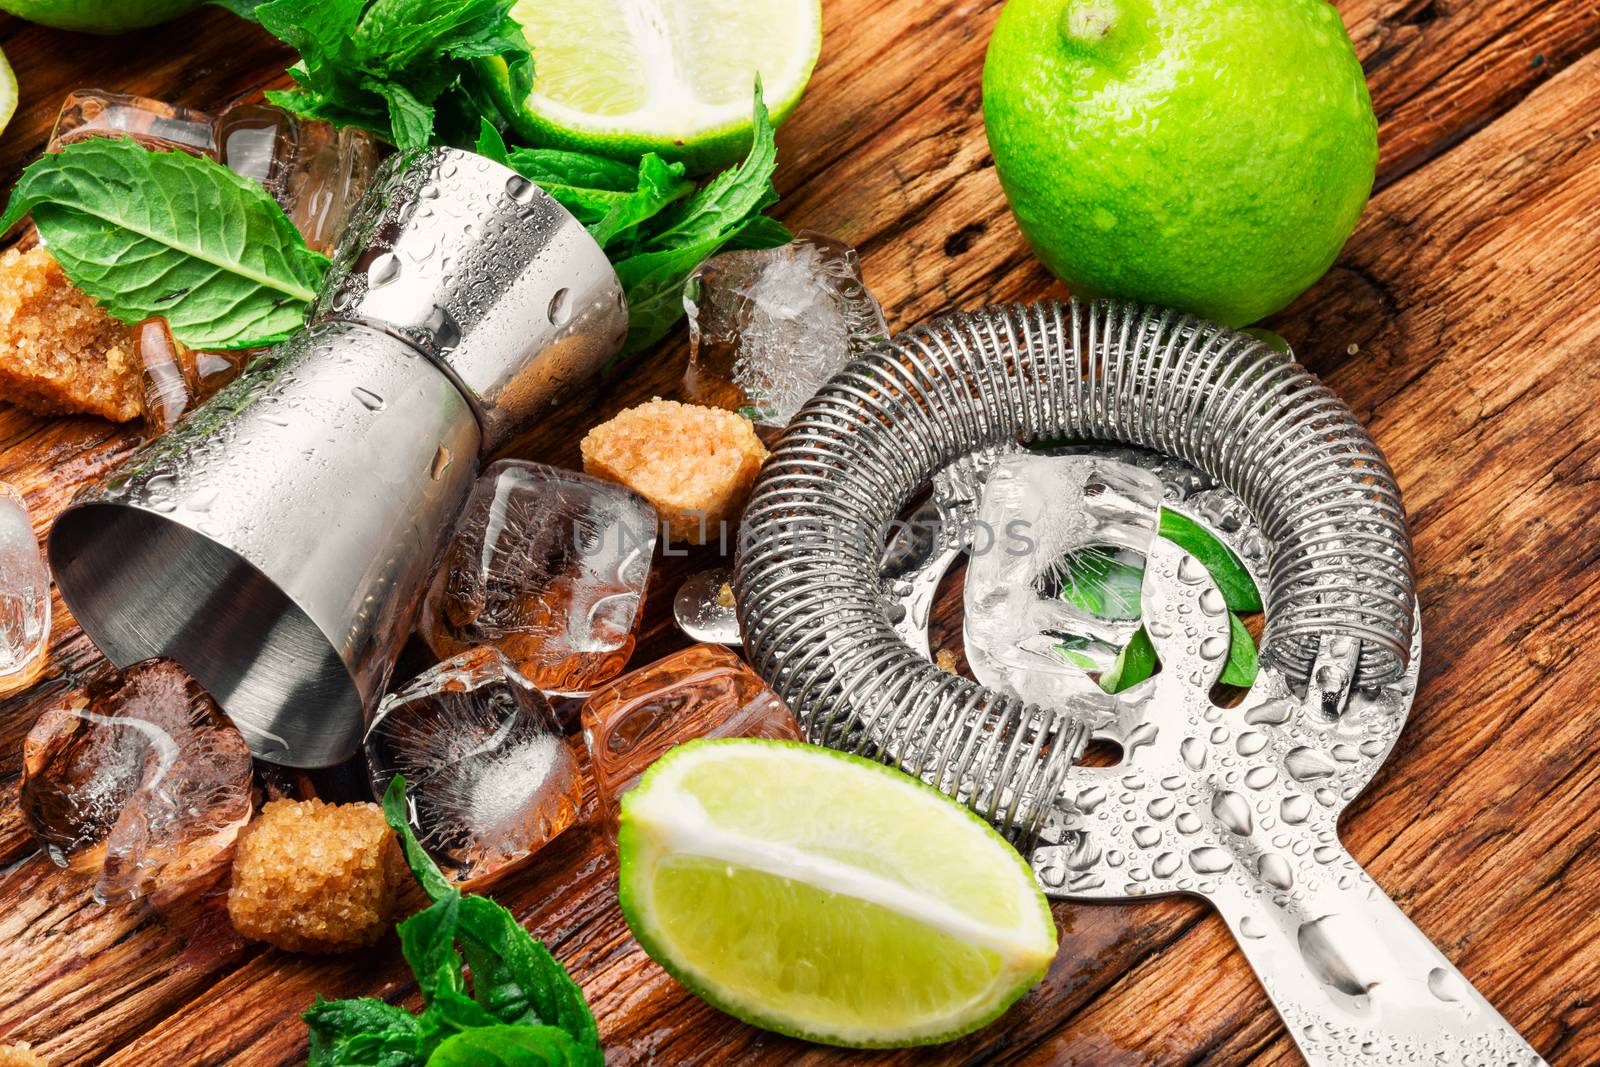 Mint, lime, ice ingredients and bar utensils